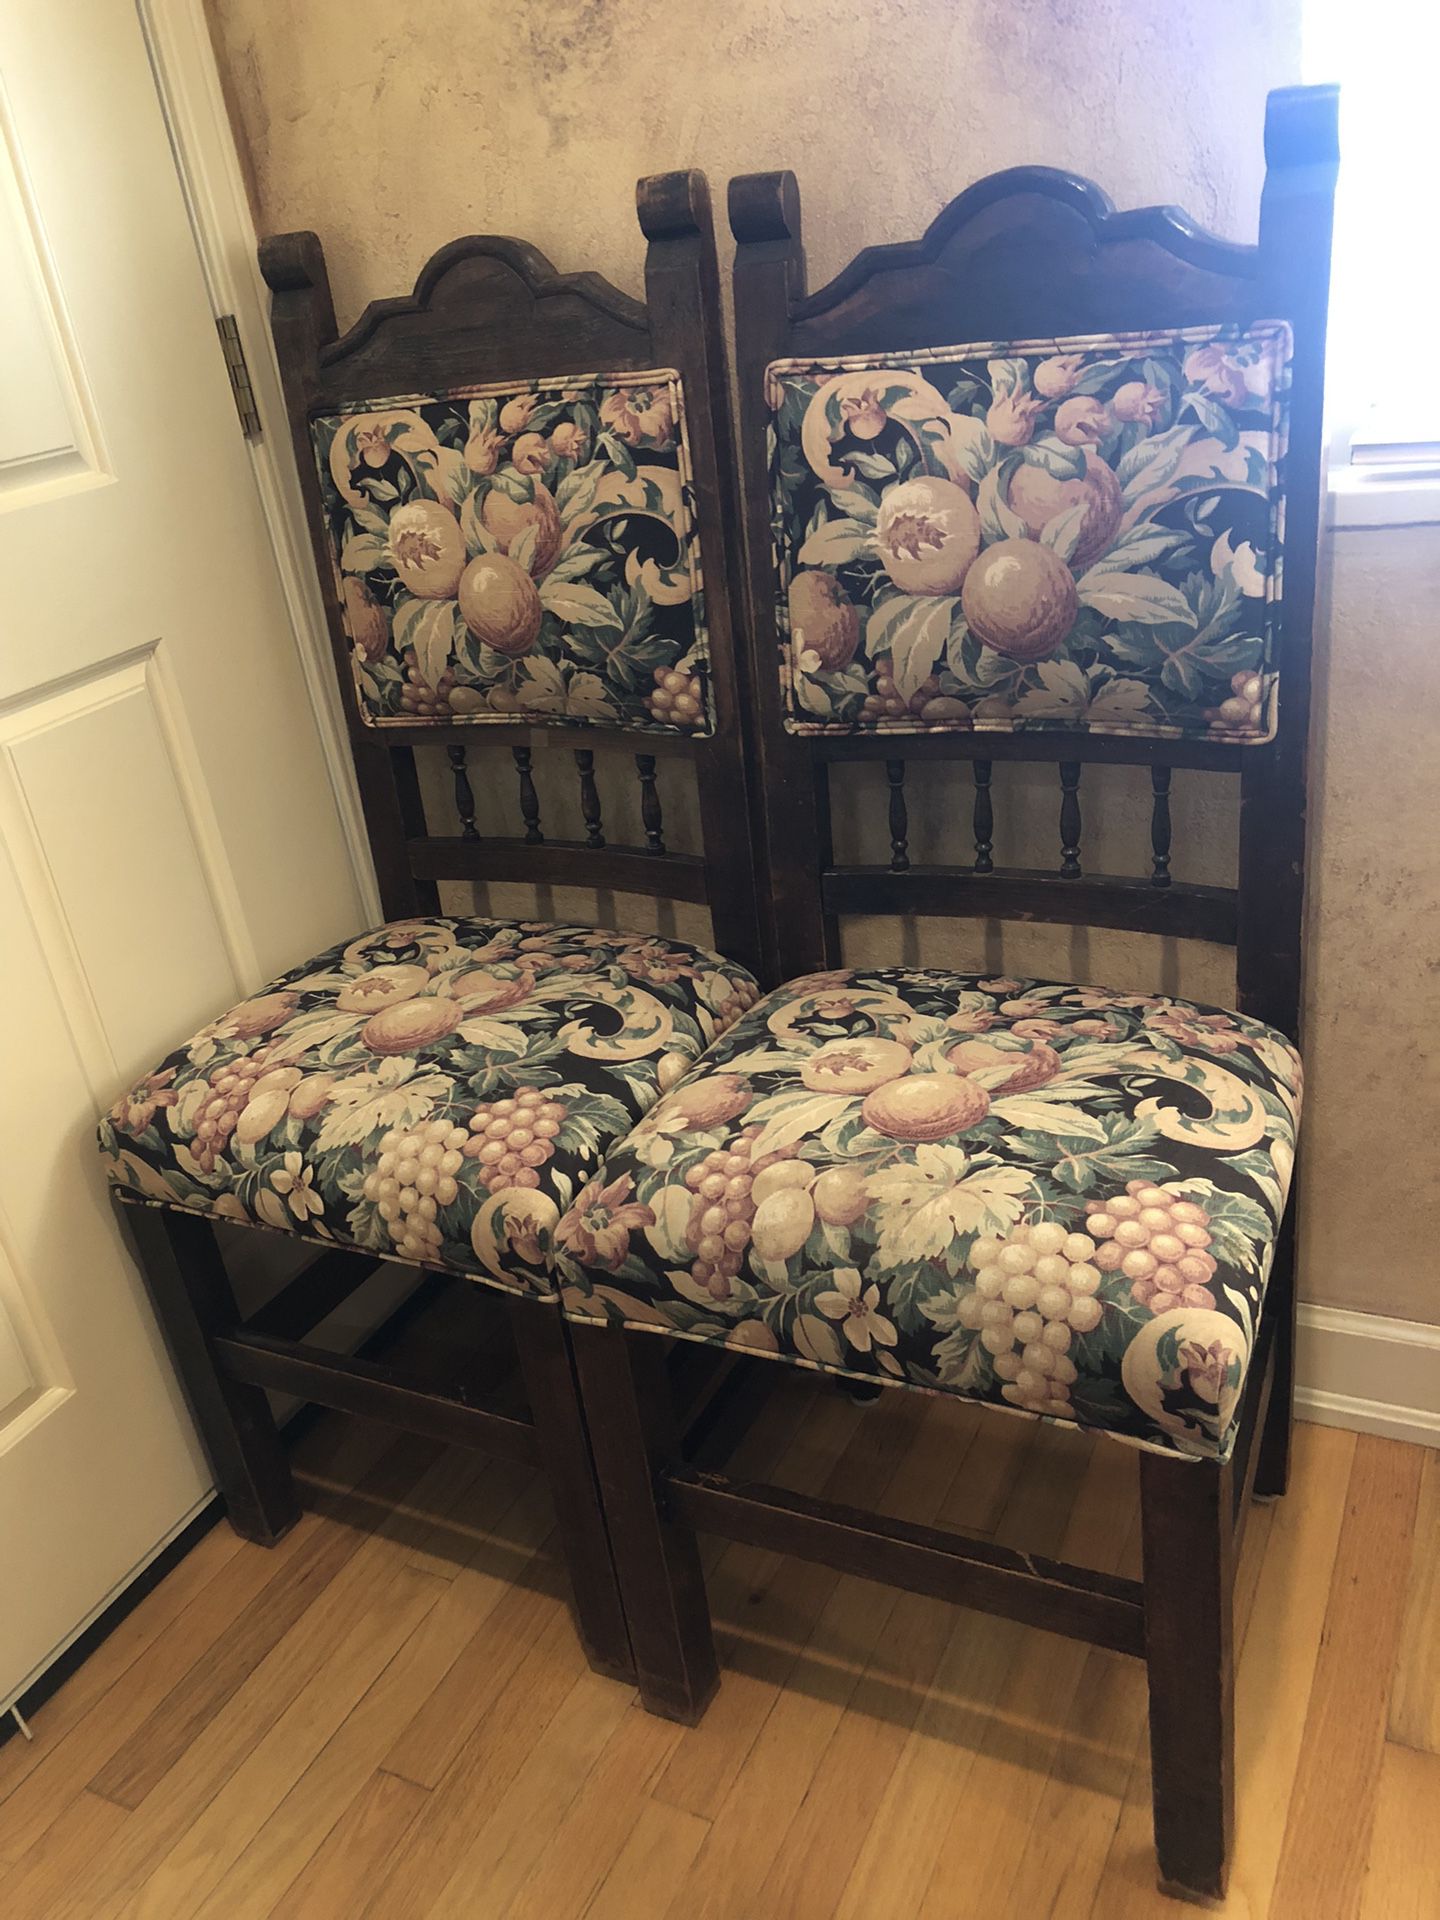 Vintage Chairs x2